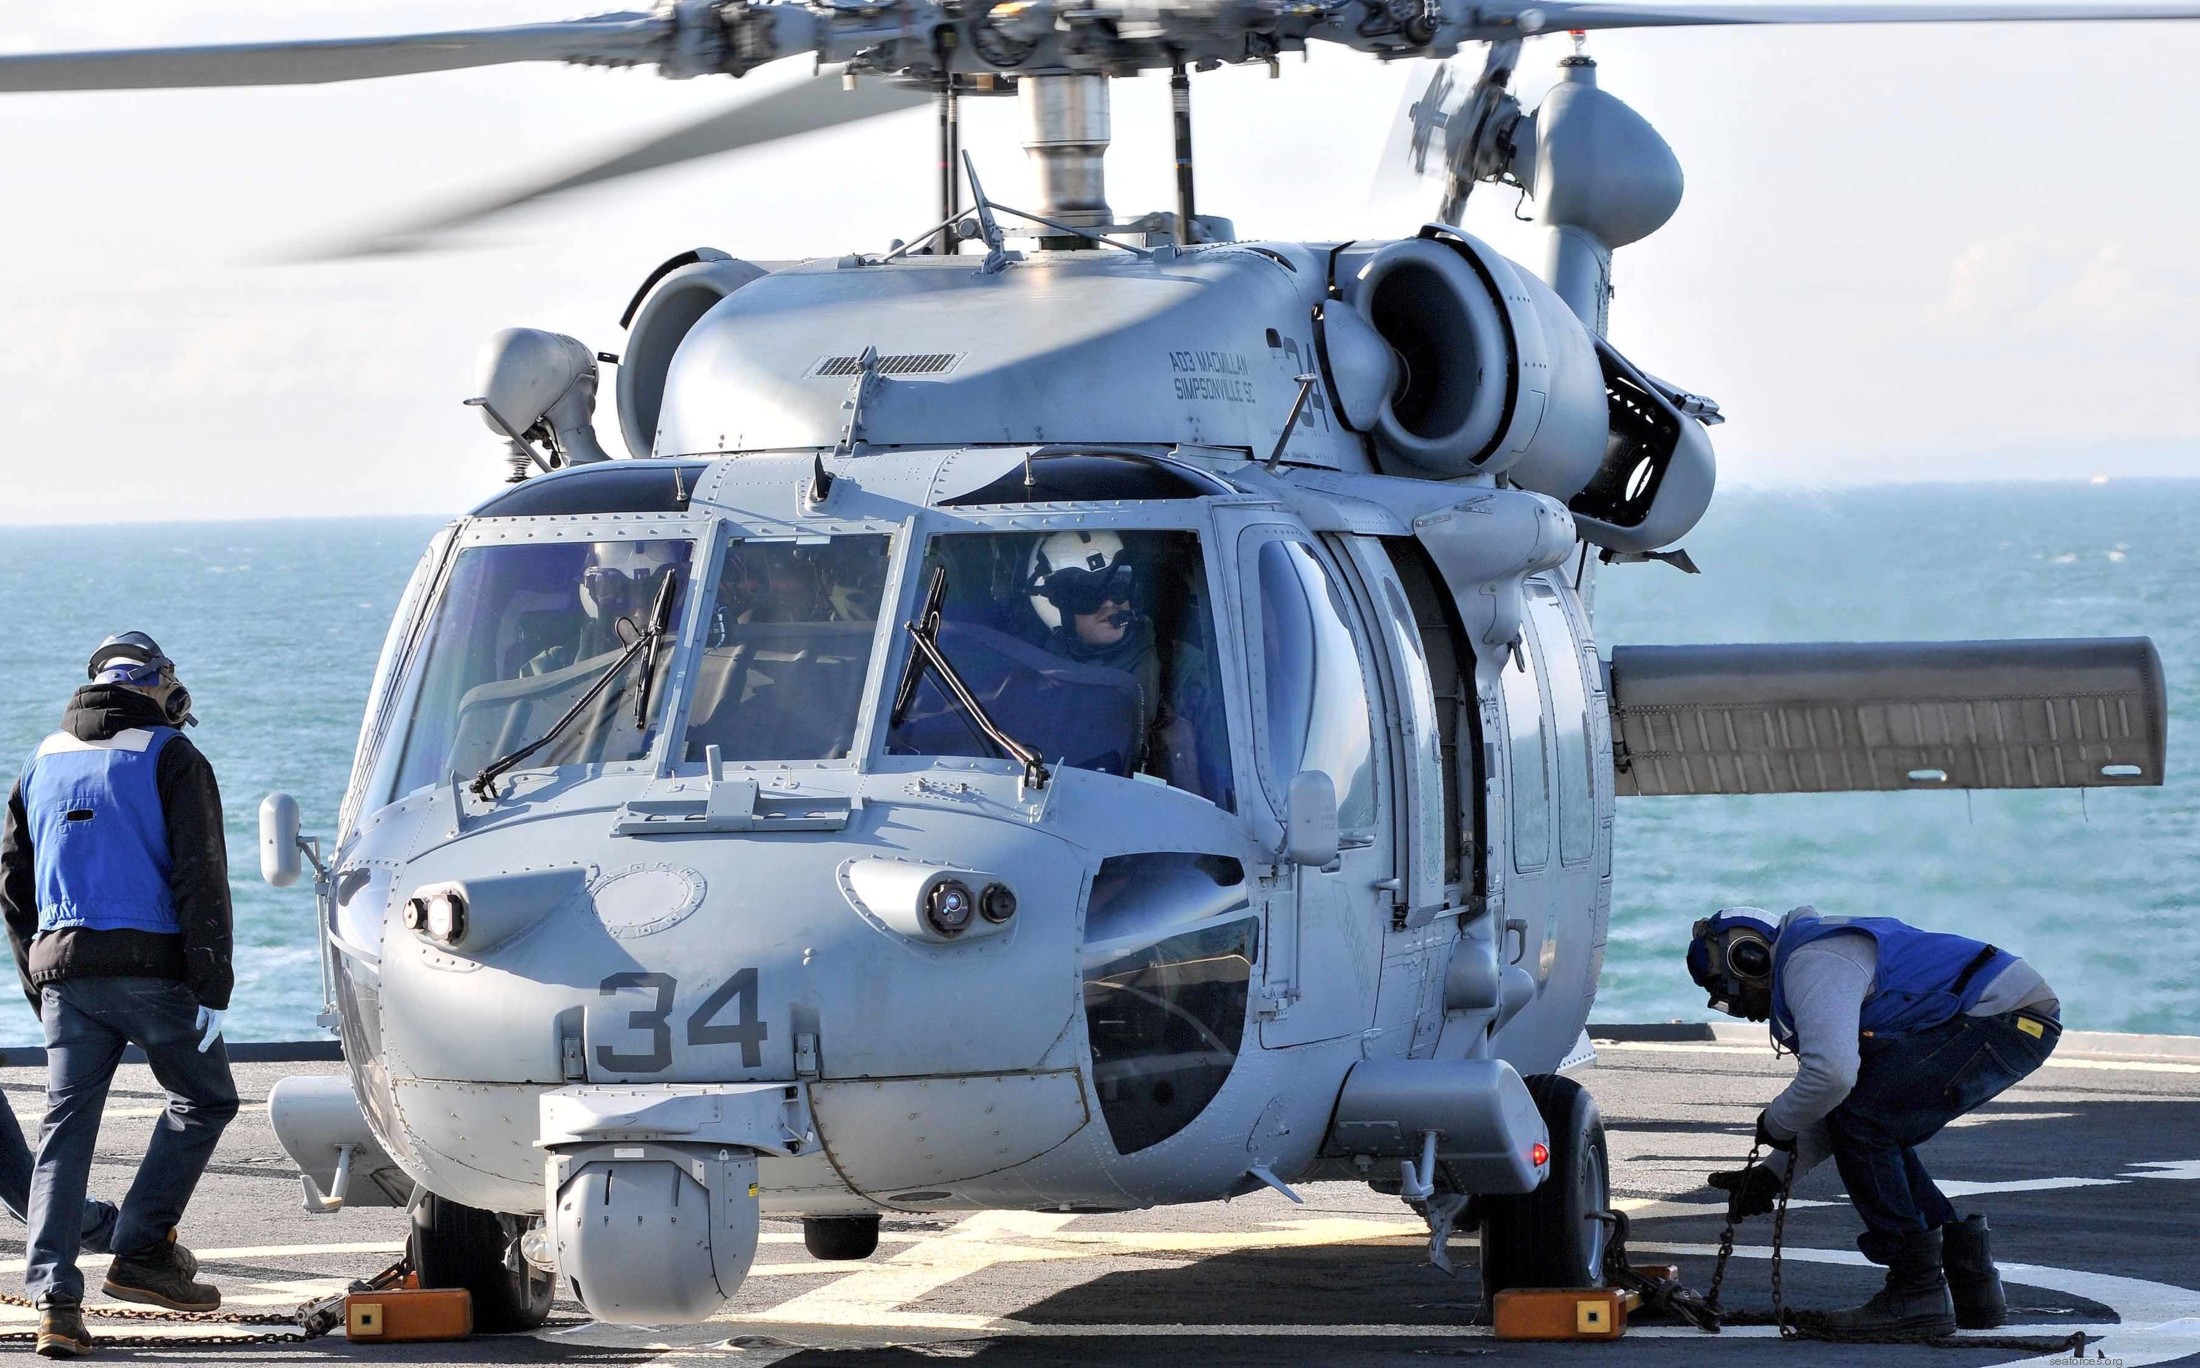 hsc-28 dragon whales helicopter sea combat squadron mh-60s seahawk us navy 238